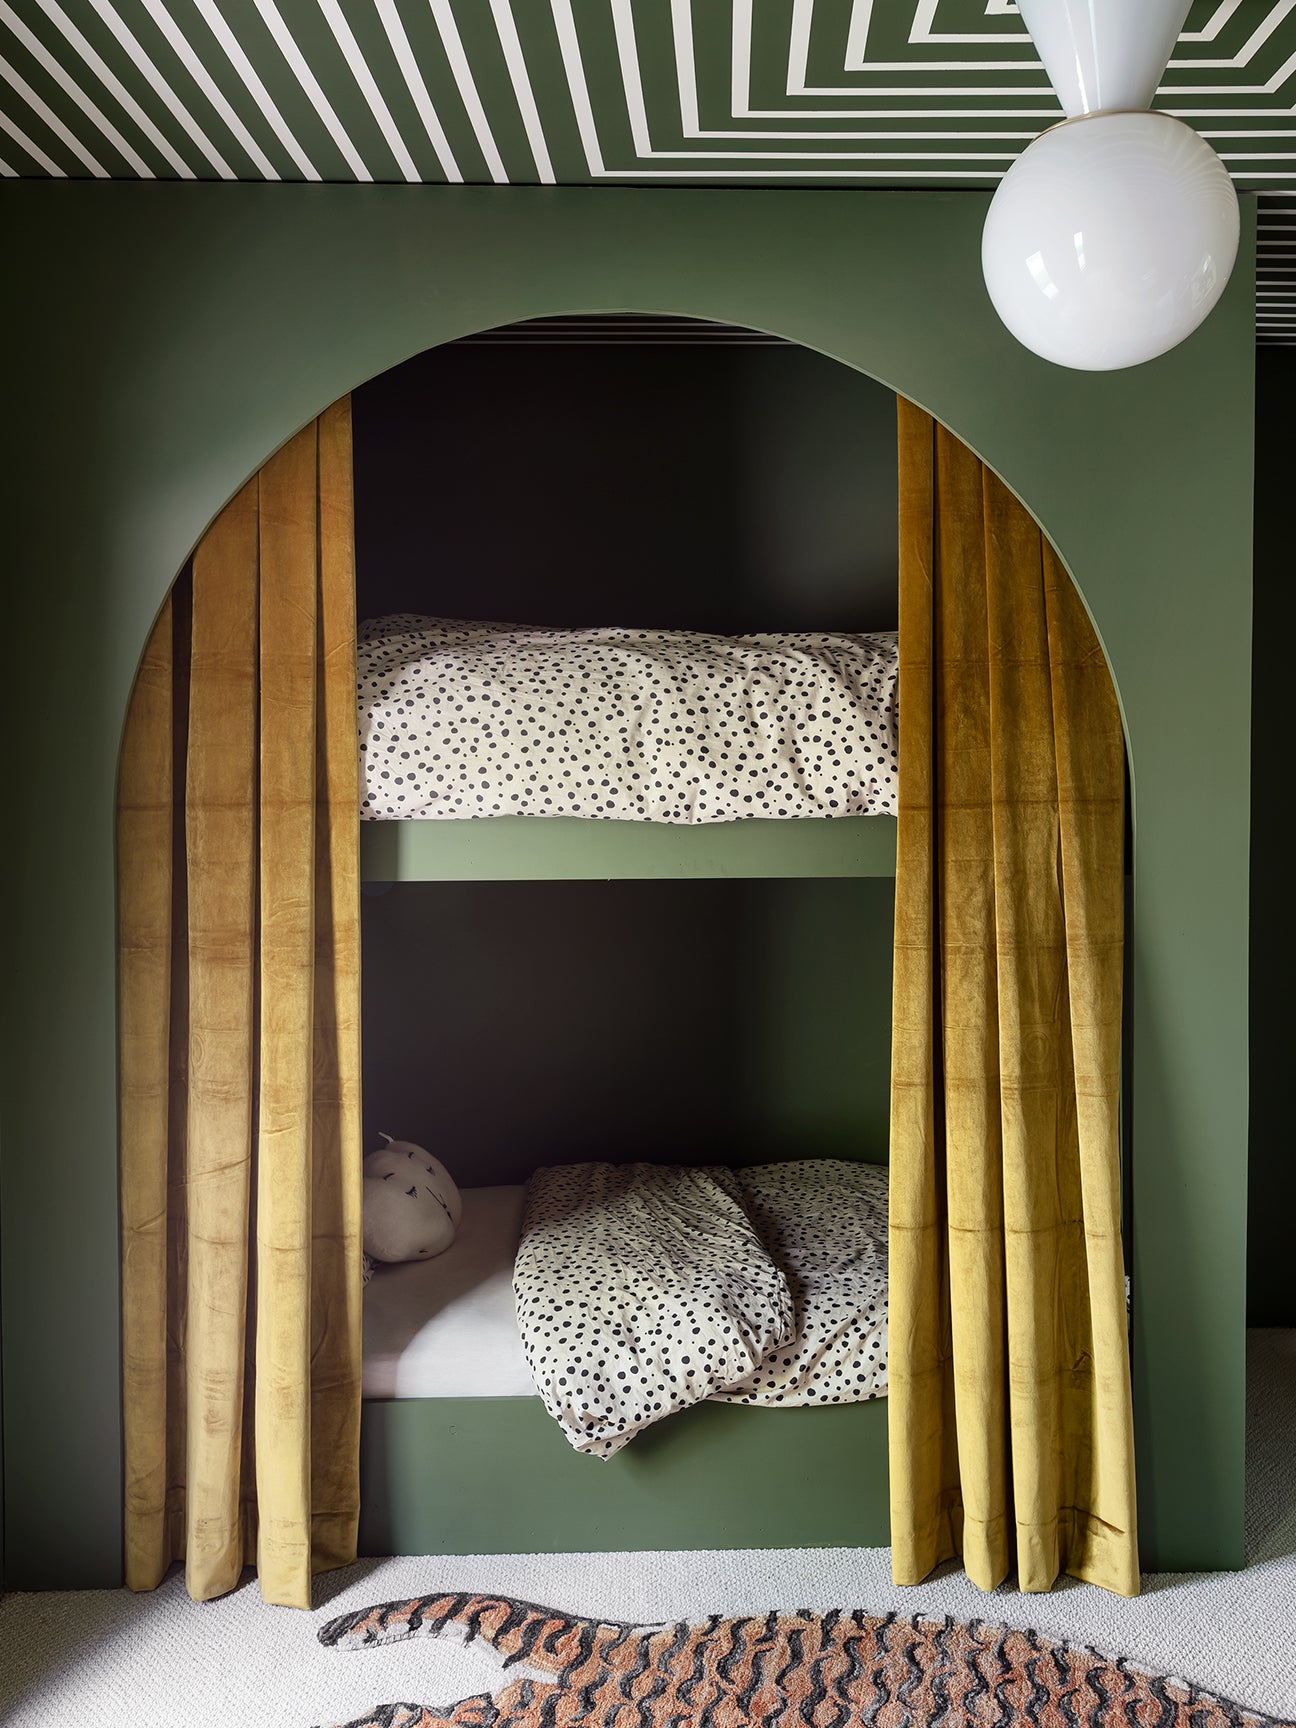 Green bunk beds with velvet curtains